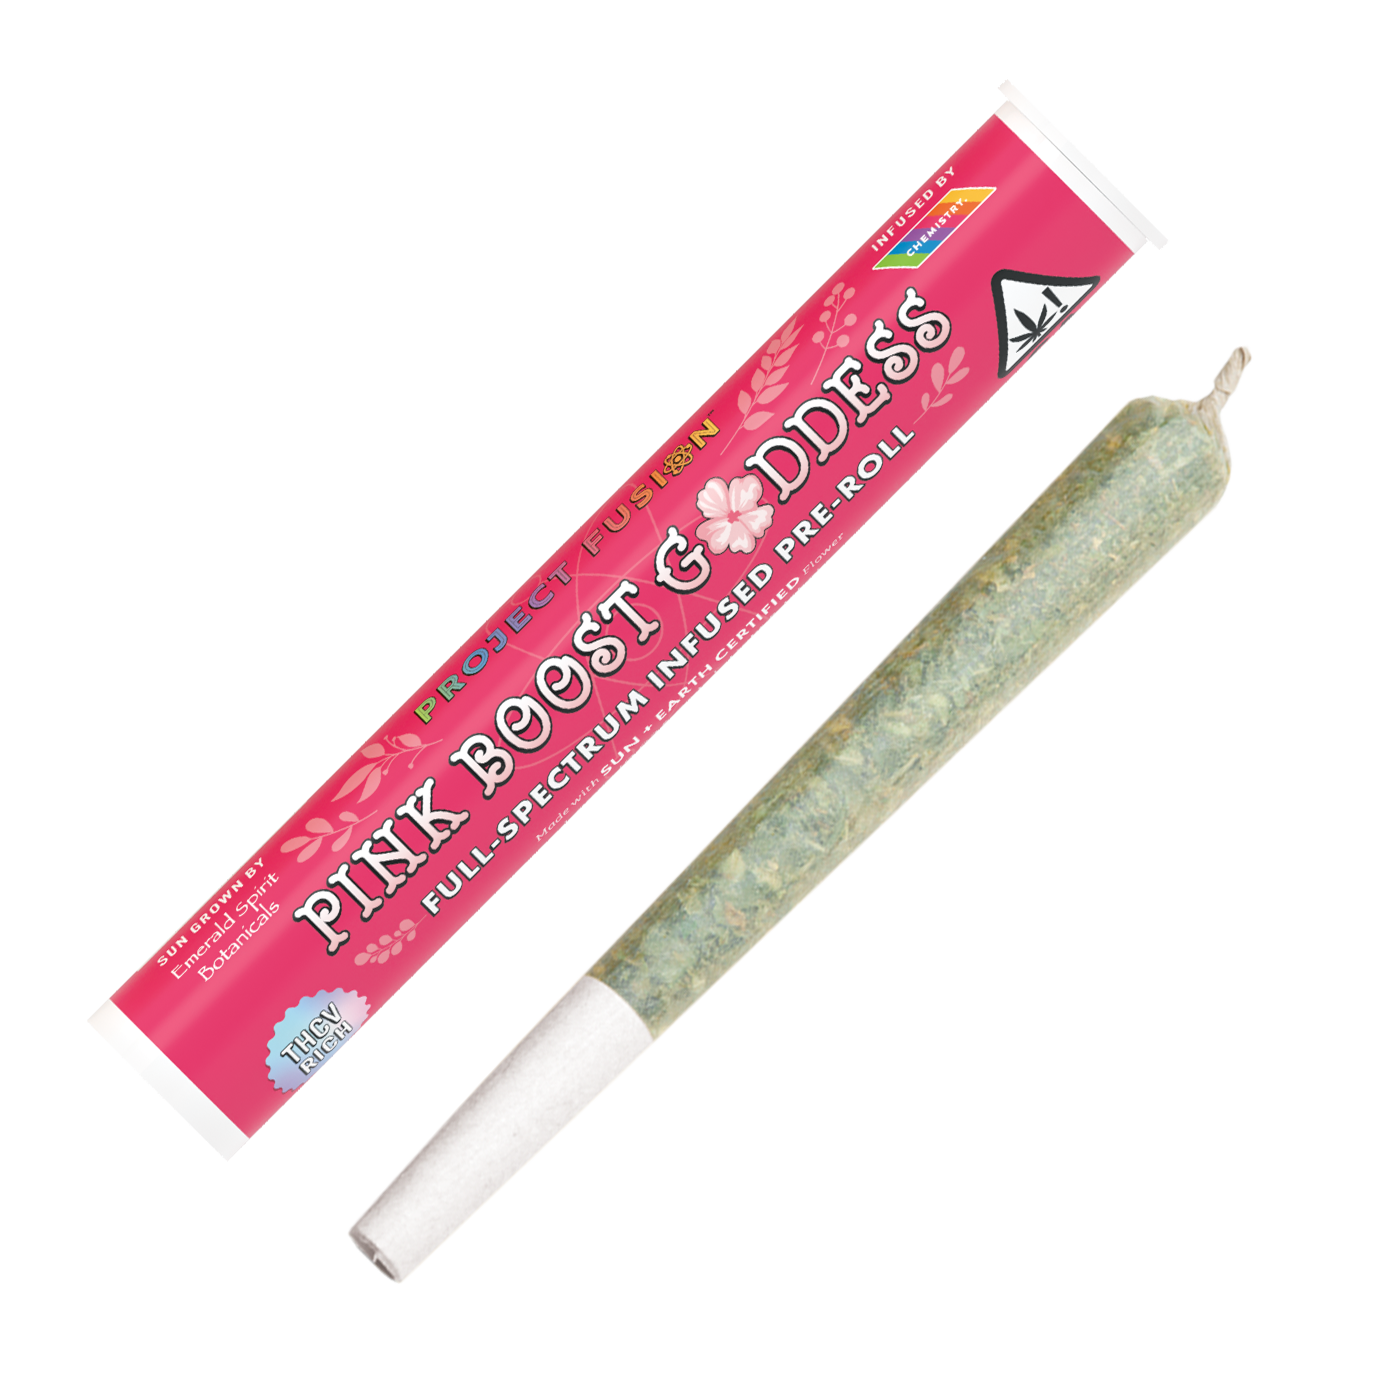 A photograph of Chemistry Full Spectrum Infused Preroll Pink Boost Goddess